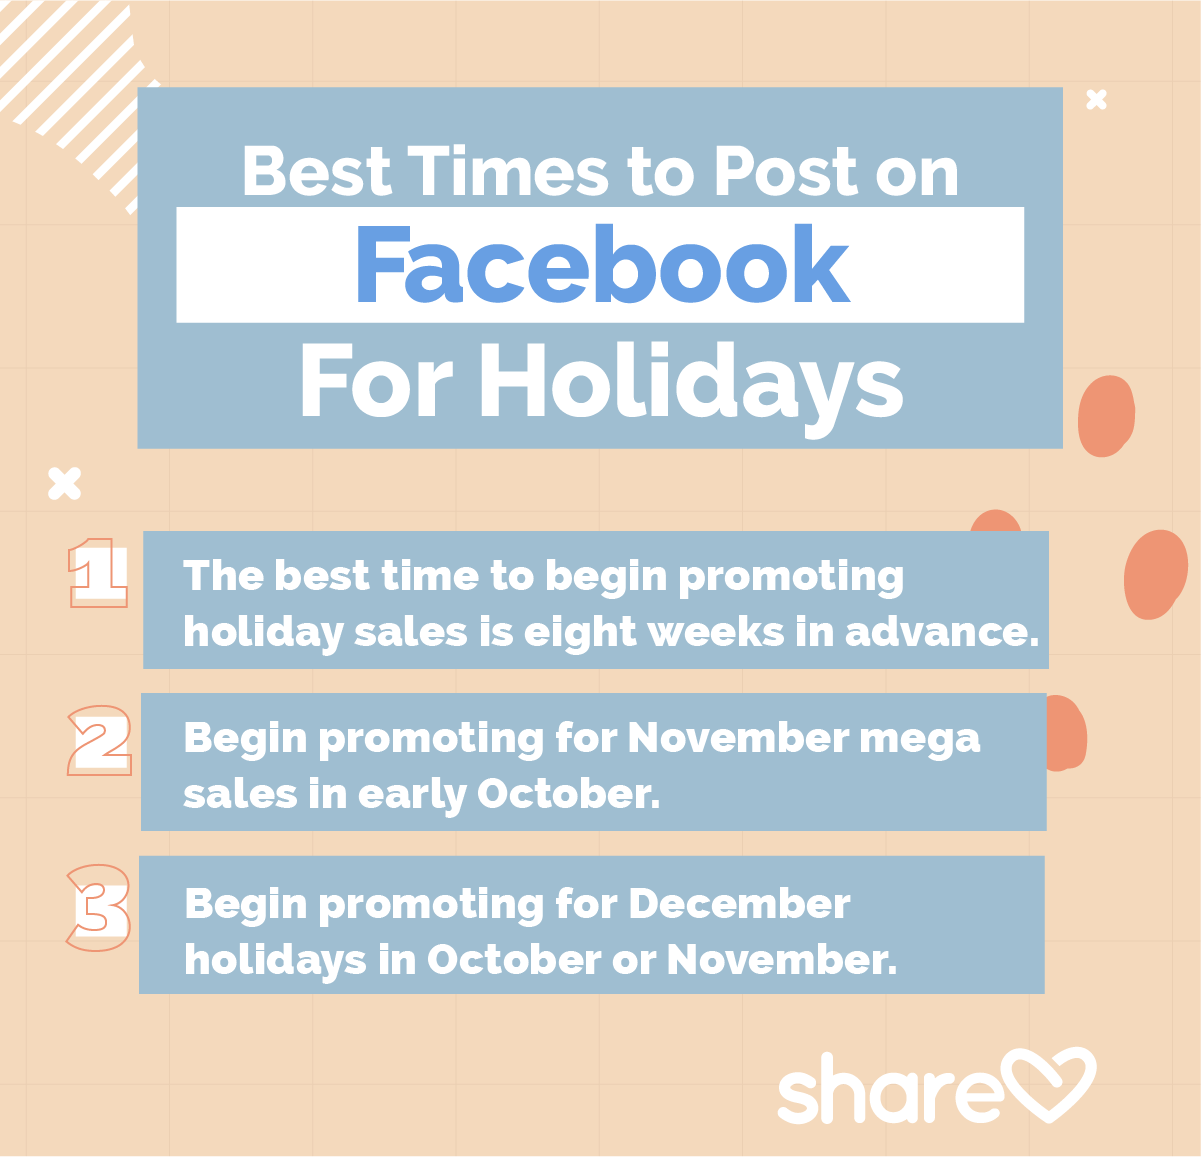 Best Times To Post On Facebook For Holidays infographic